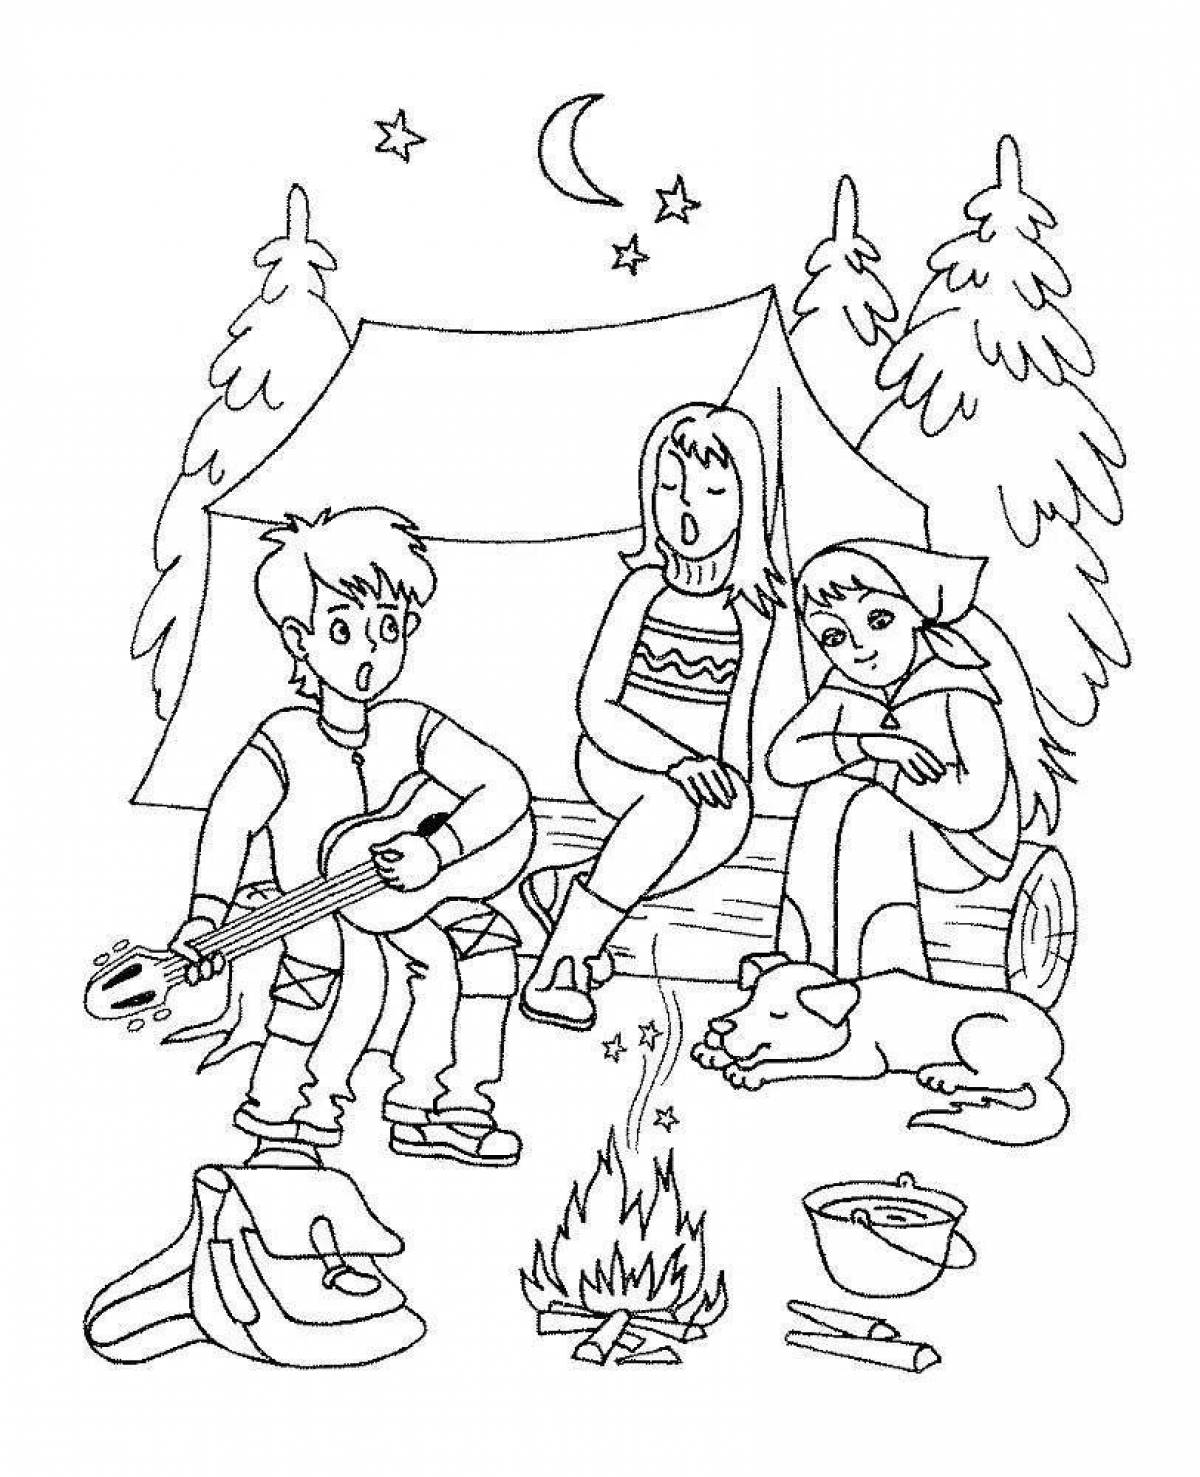 Refreshing human and nature coloring page